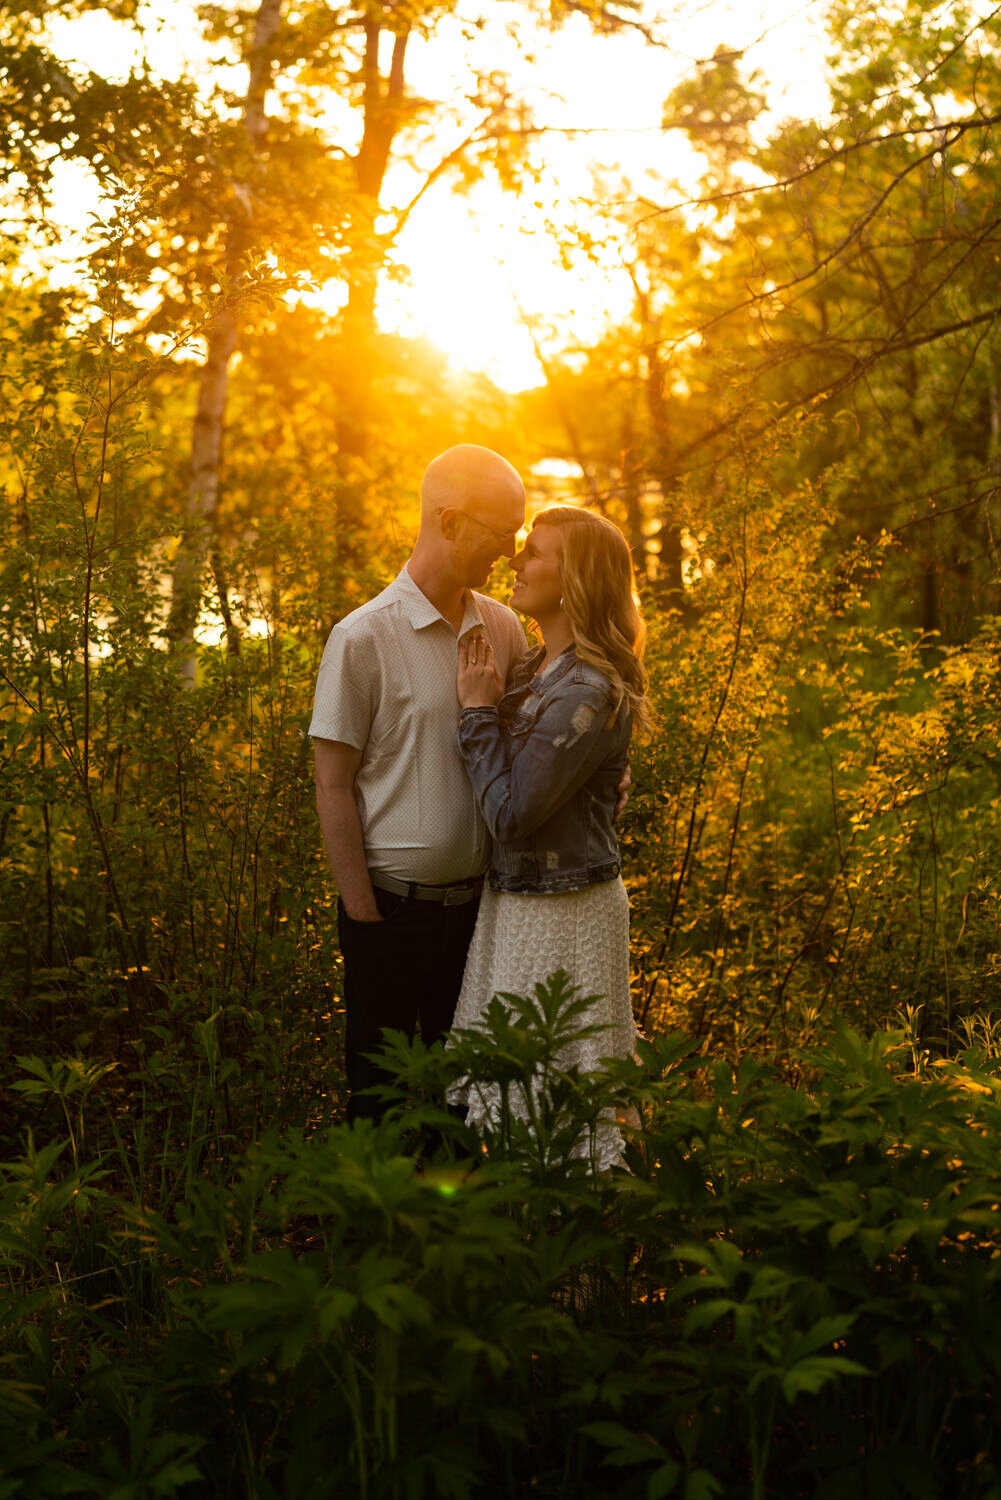 Man and woman in denim jacket smile at sunset in a field.